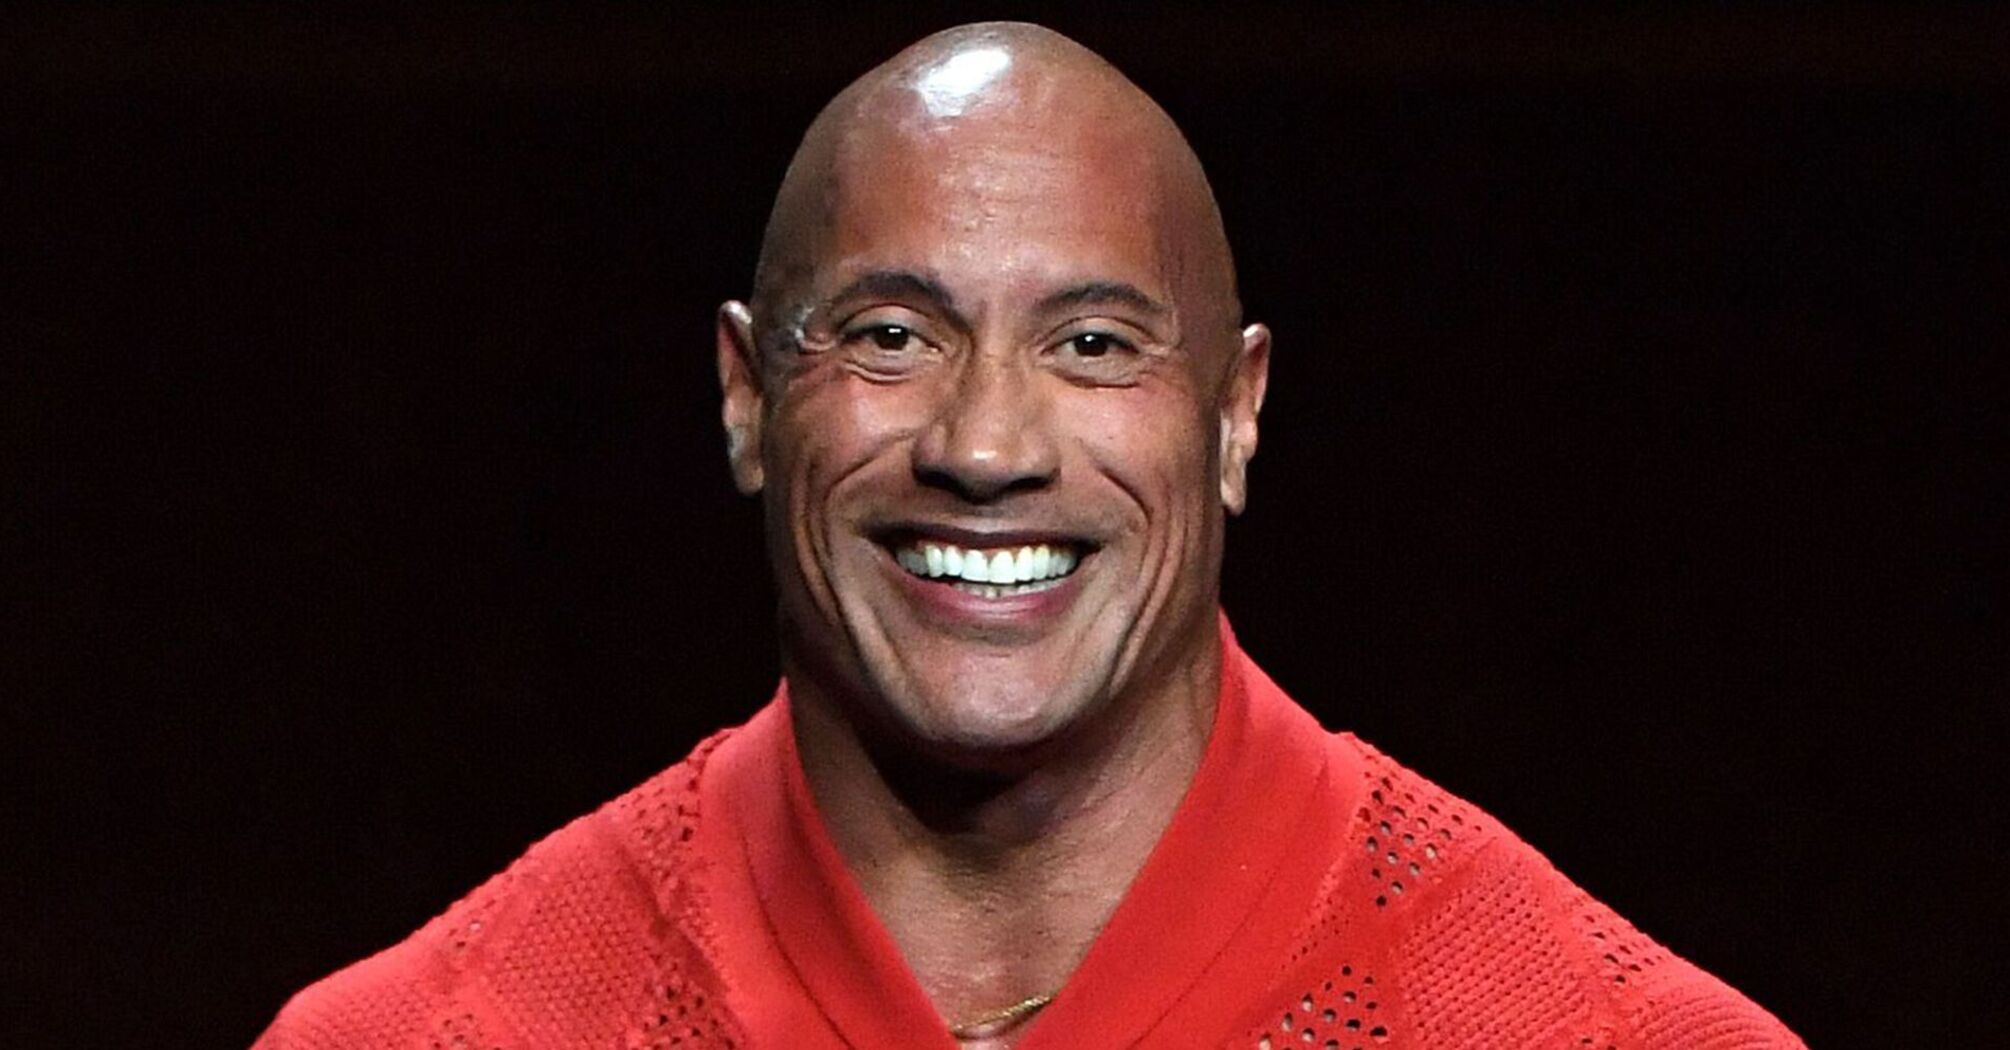 Top 5 facts about Dwayne "The Rock" Johnson